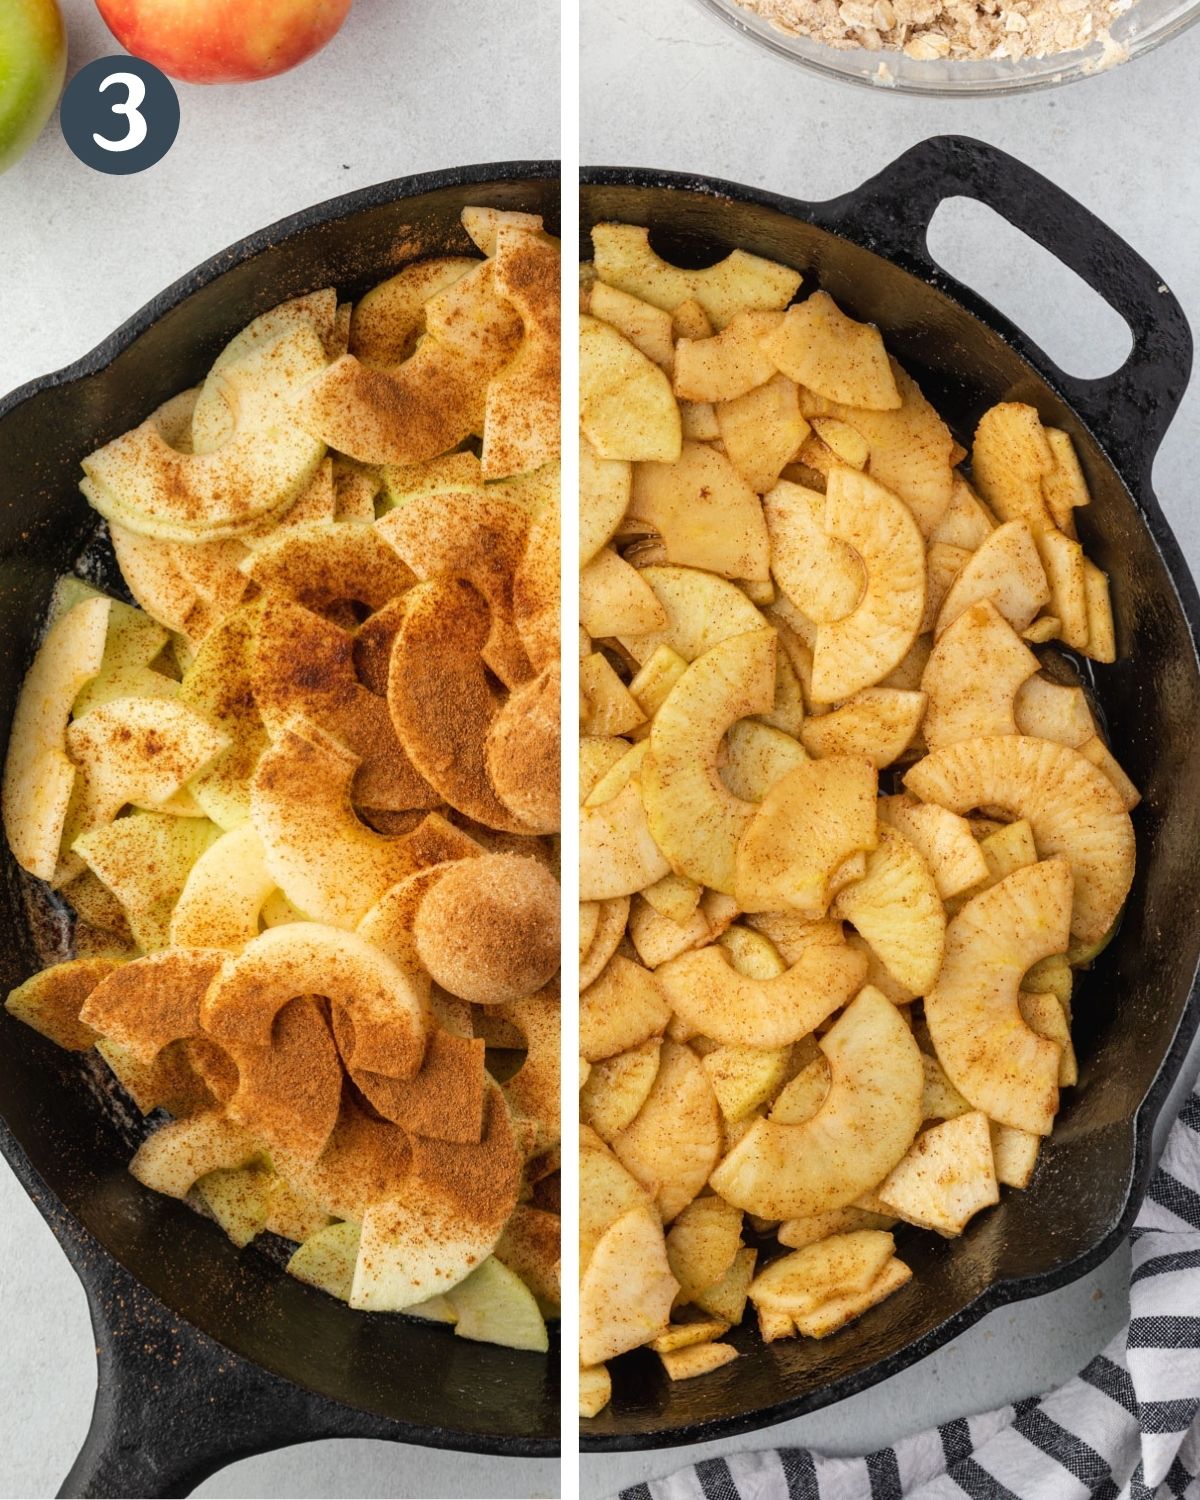 Split image showing uncooked apples with cinnamon on top and cooked apples.